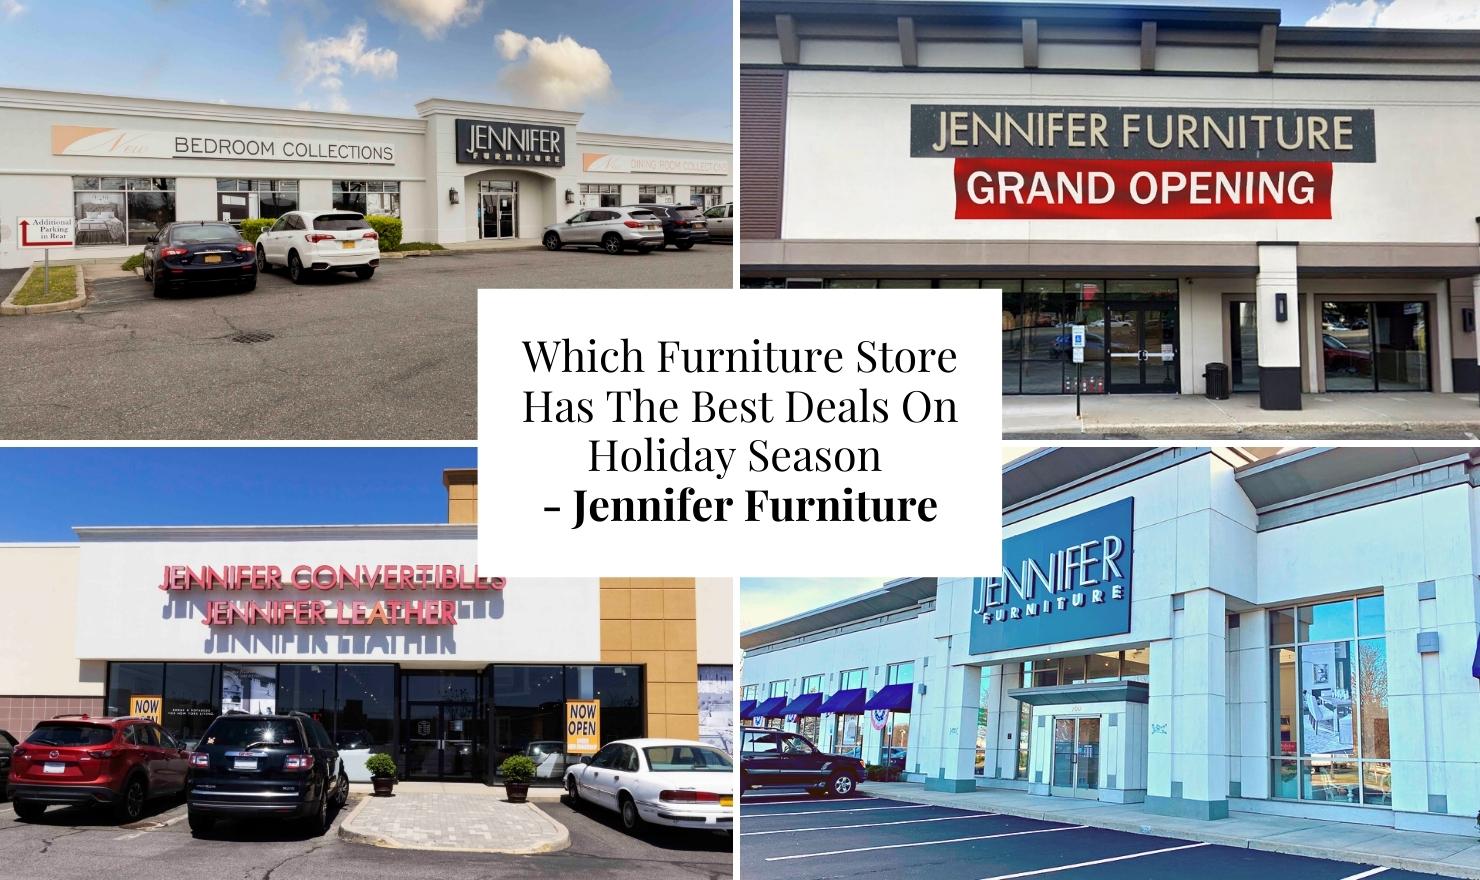 Which Furniture Store Has The Best Deals On Holiday Season in 2022?